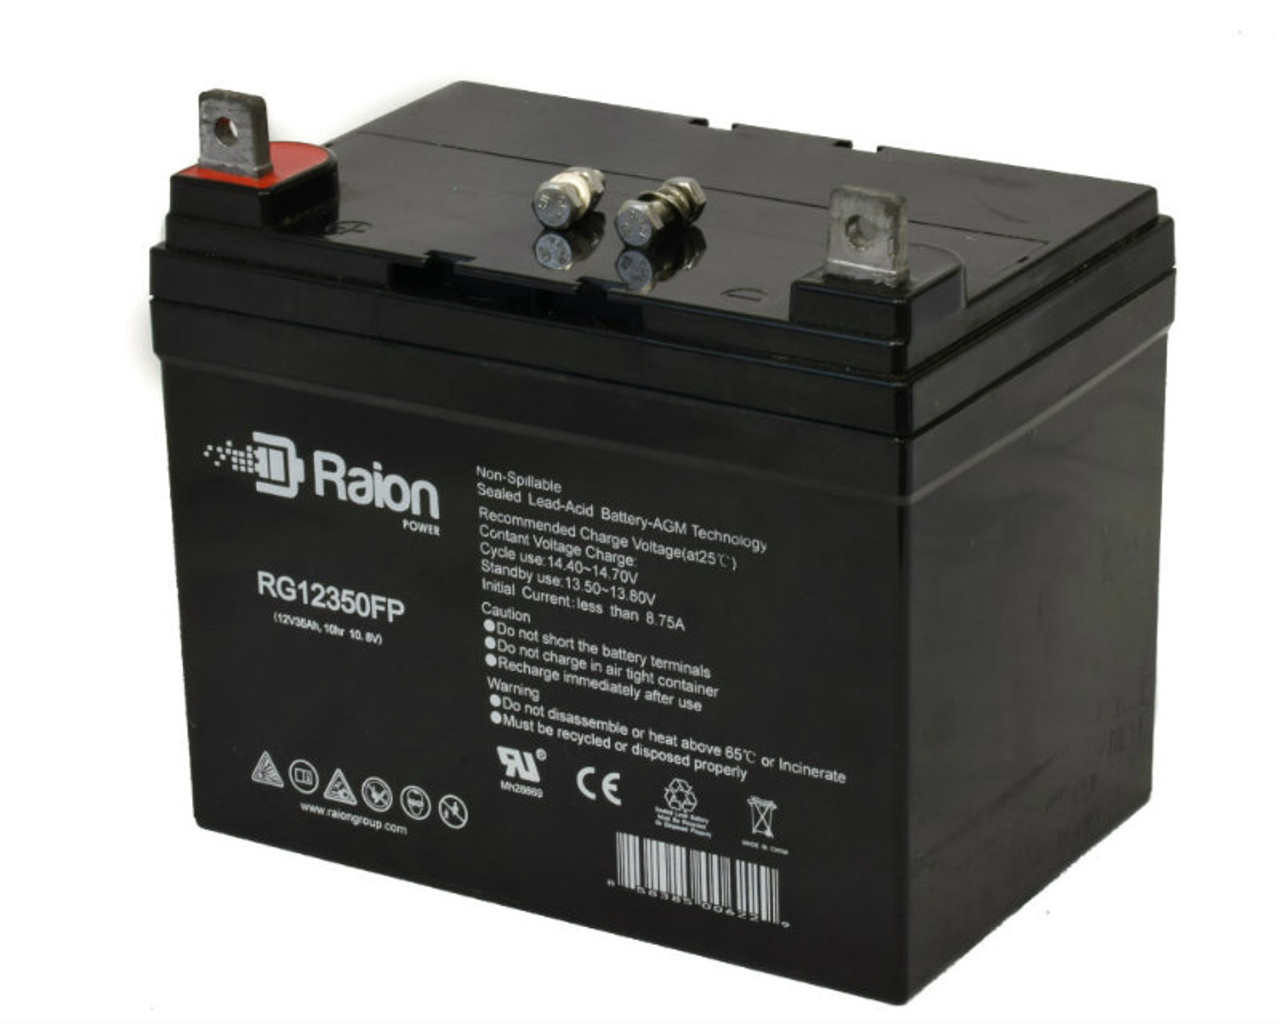 Raion Power Replacement 12V 35Ah RG12350FP Battery for Agco Allis 1723H